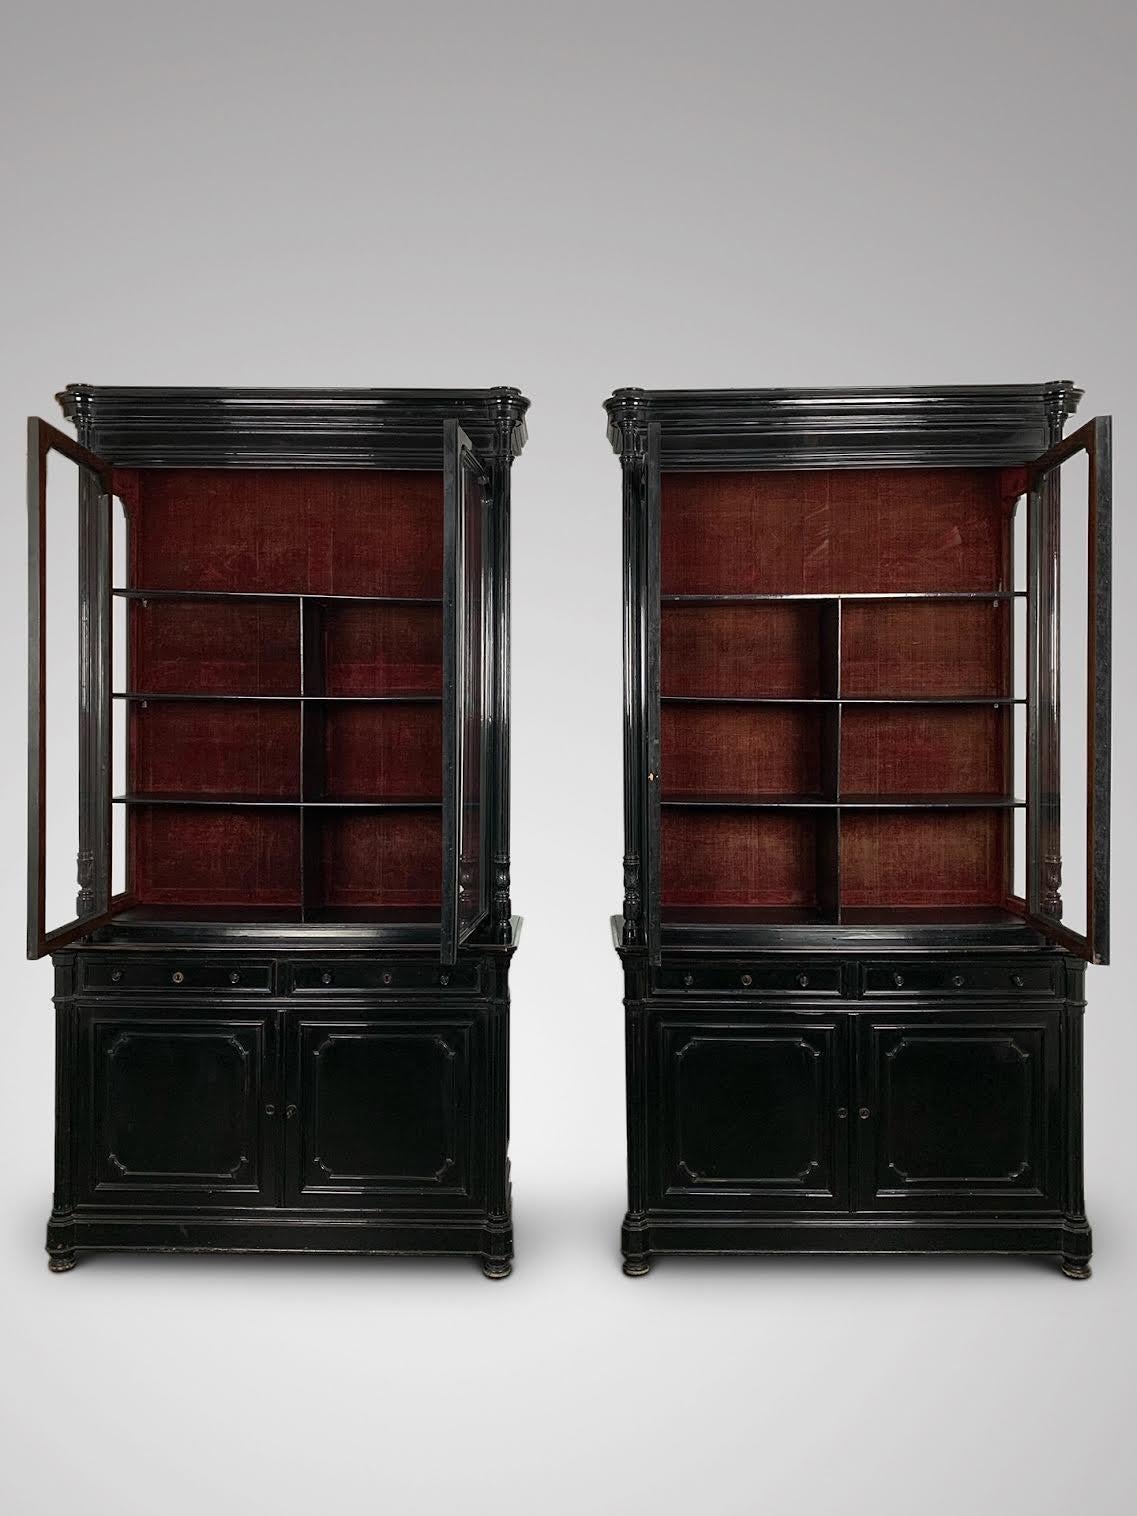 We are delighted to offer for sale this stunning pair of impressive 19th century French ebonized cabinets or bookcases. It features a rounded moulded cornice above a pair of shaped glazed doors, side panelled glass, flanked by a pair of carved,